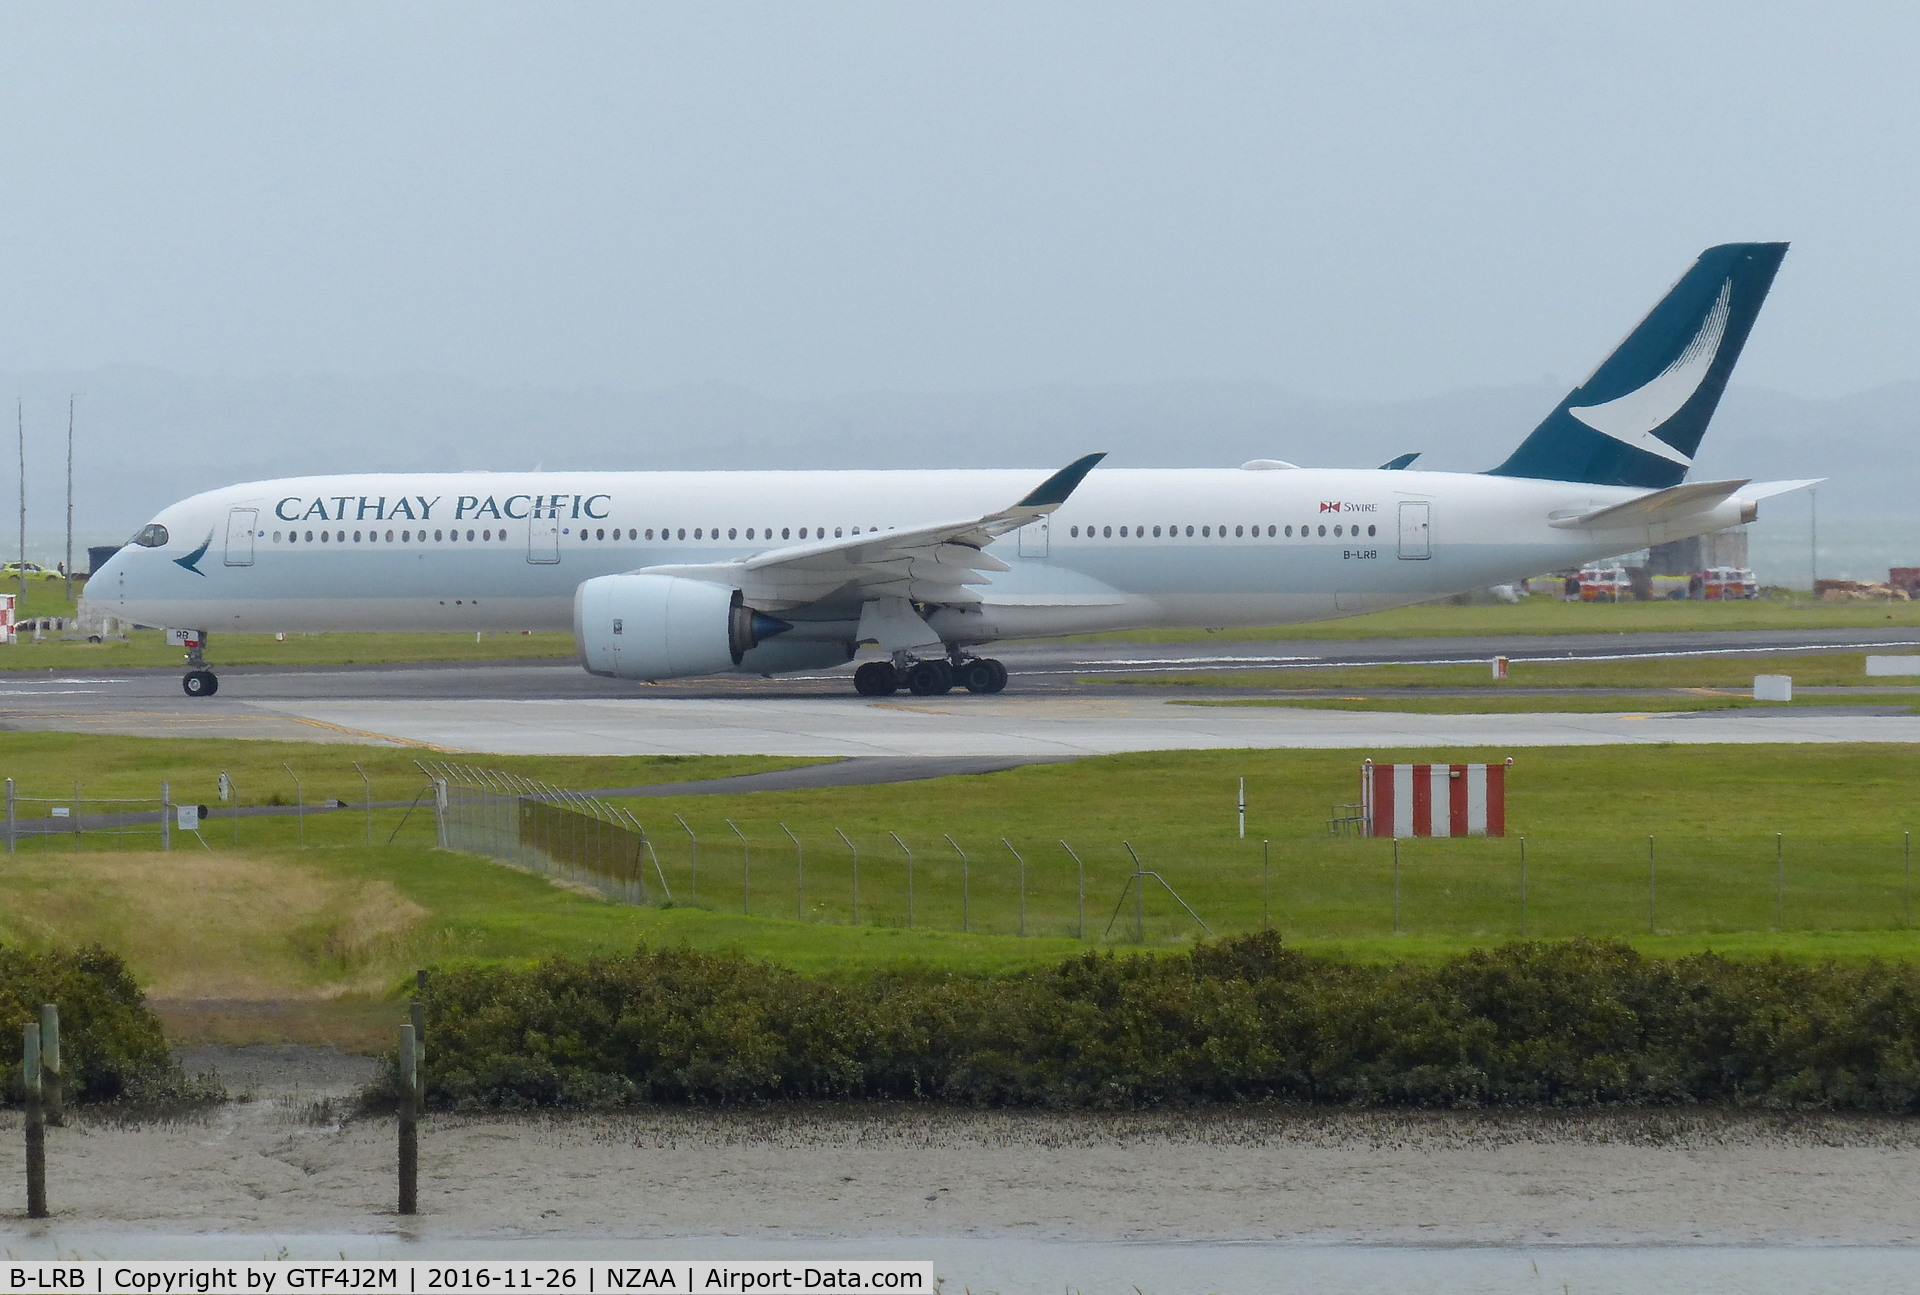 B-LRB, 2016 Airbus A350-941 C/N 032, B-LRB  Cathay Pacific  at Auckland 26.11.16